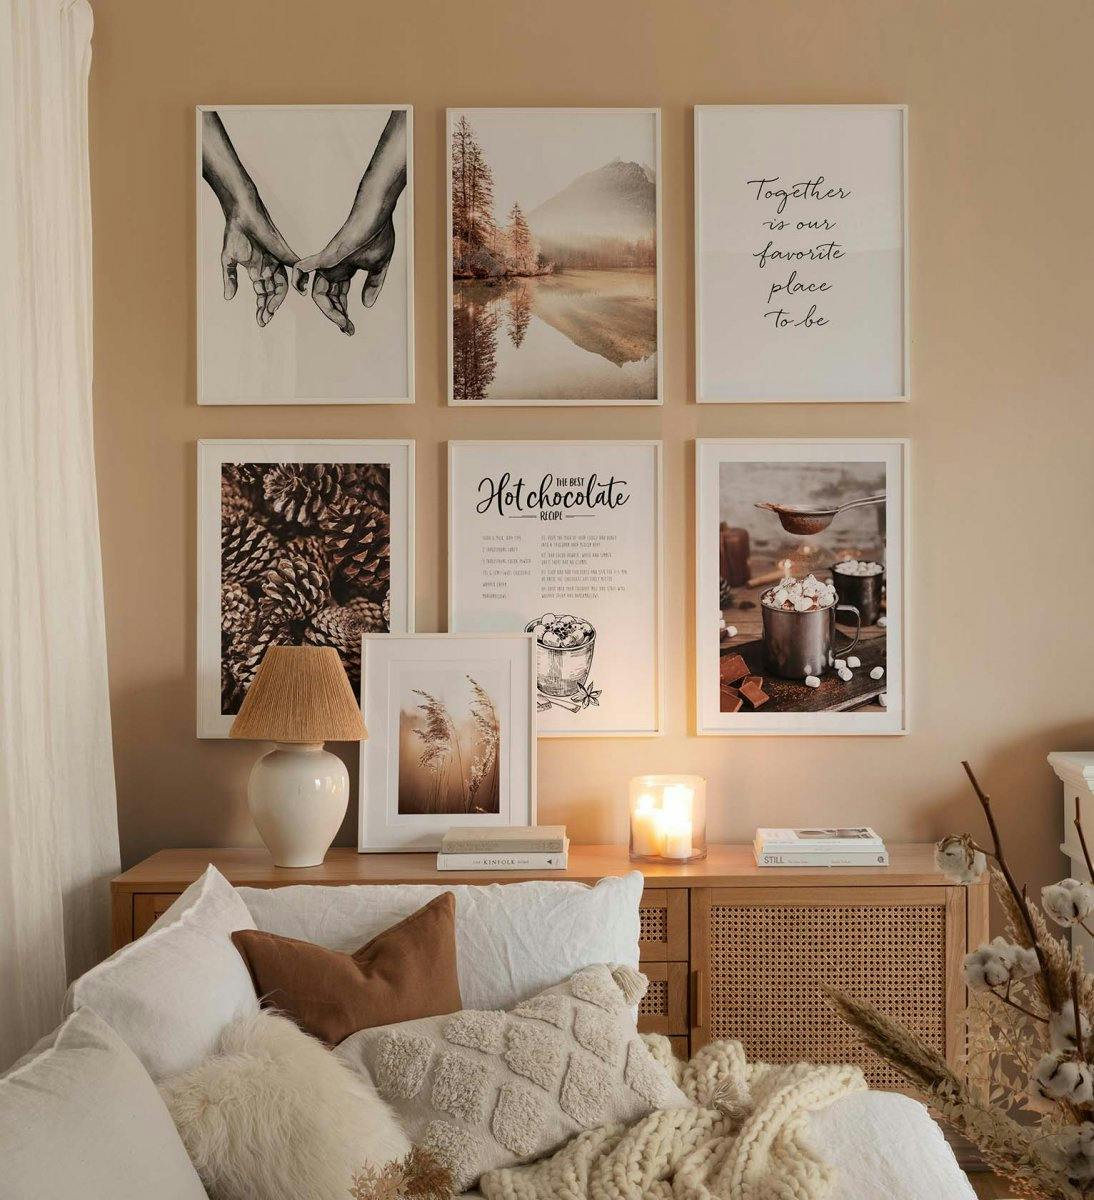 Monochrome gallery wall with white wooden frames combined with winter and nature prints in brown and beige for living room